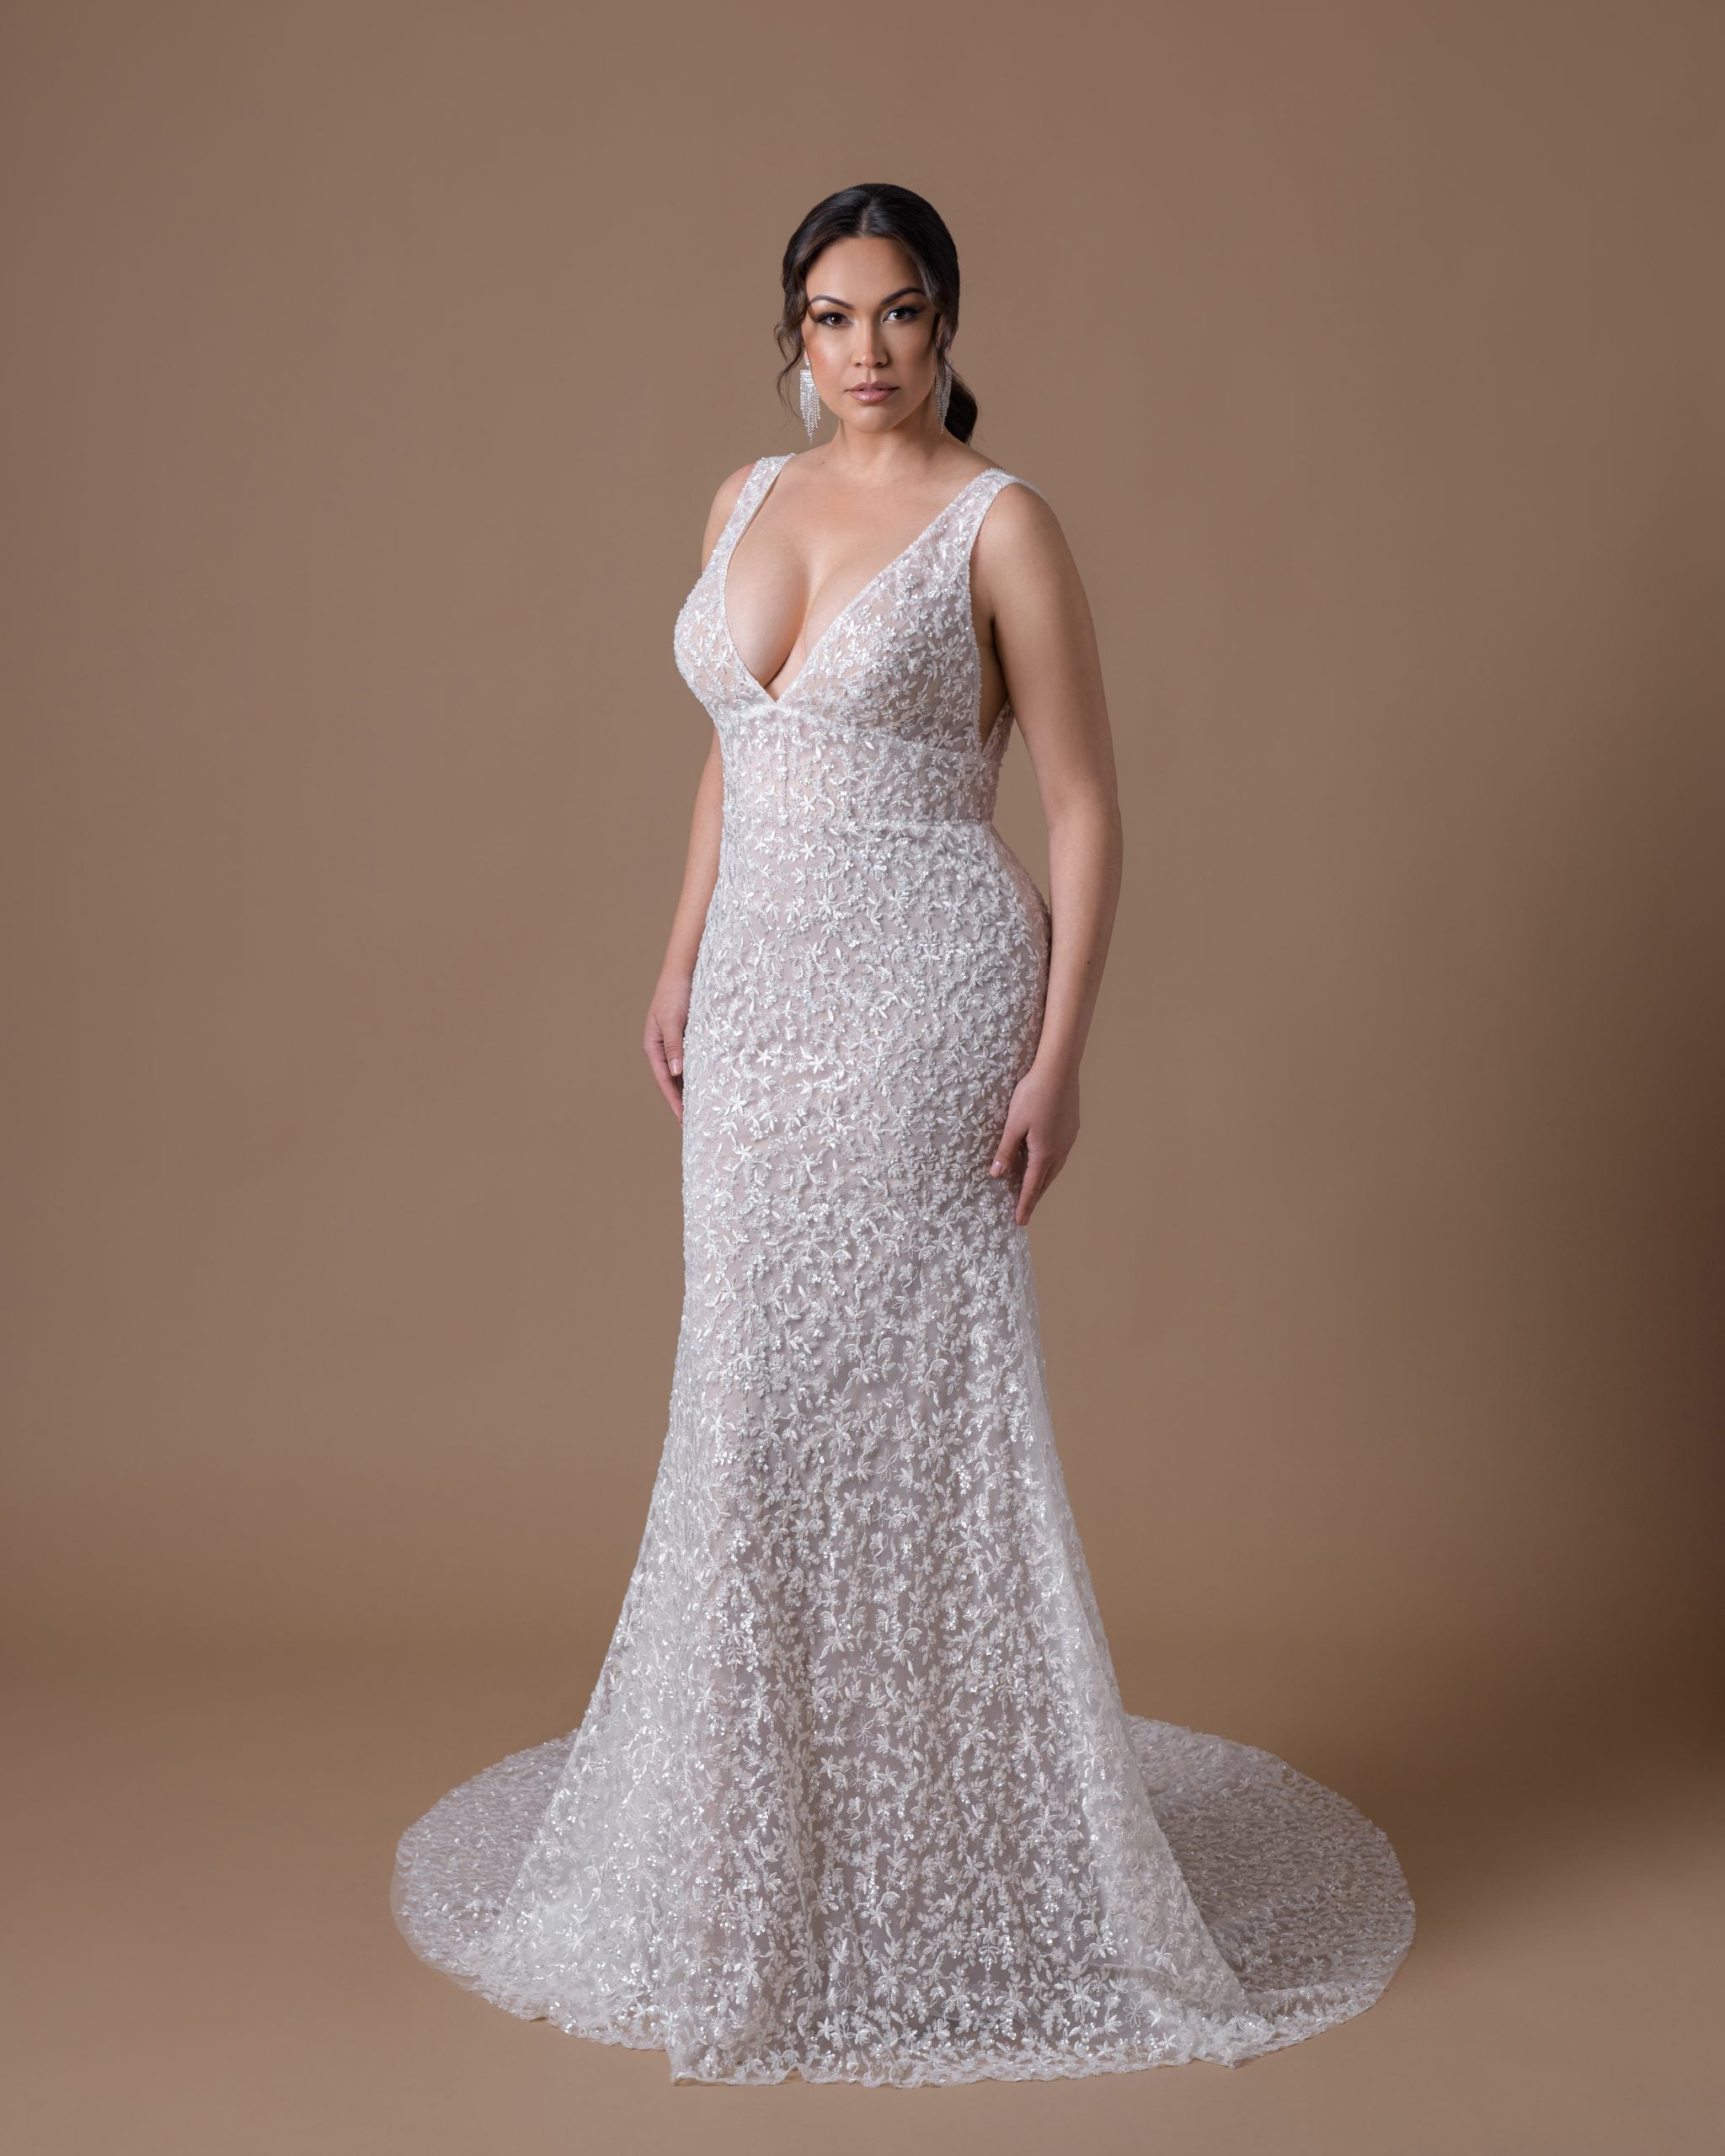 Embellished Fit-and-Flare Gown by Dany Girl - Image 1